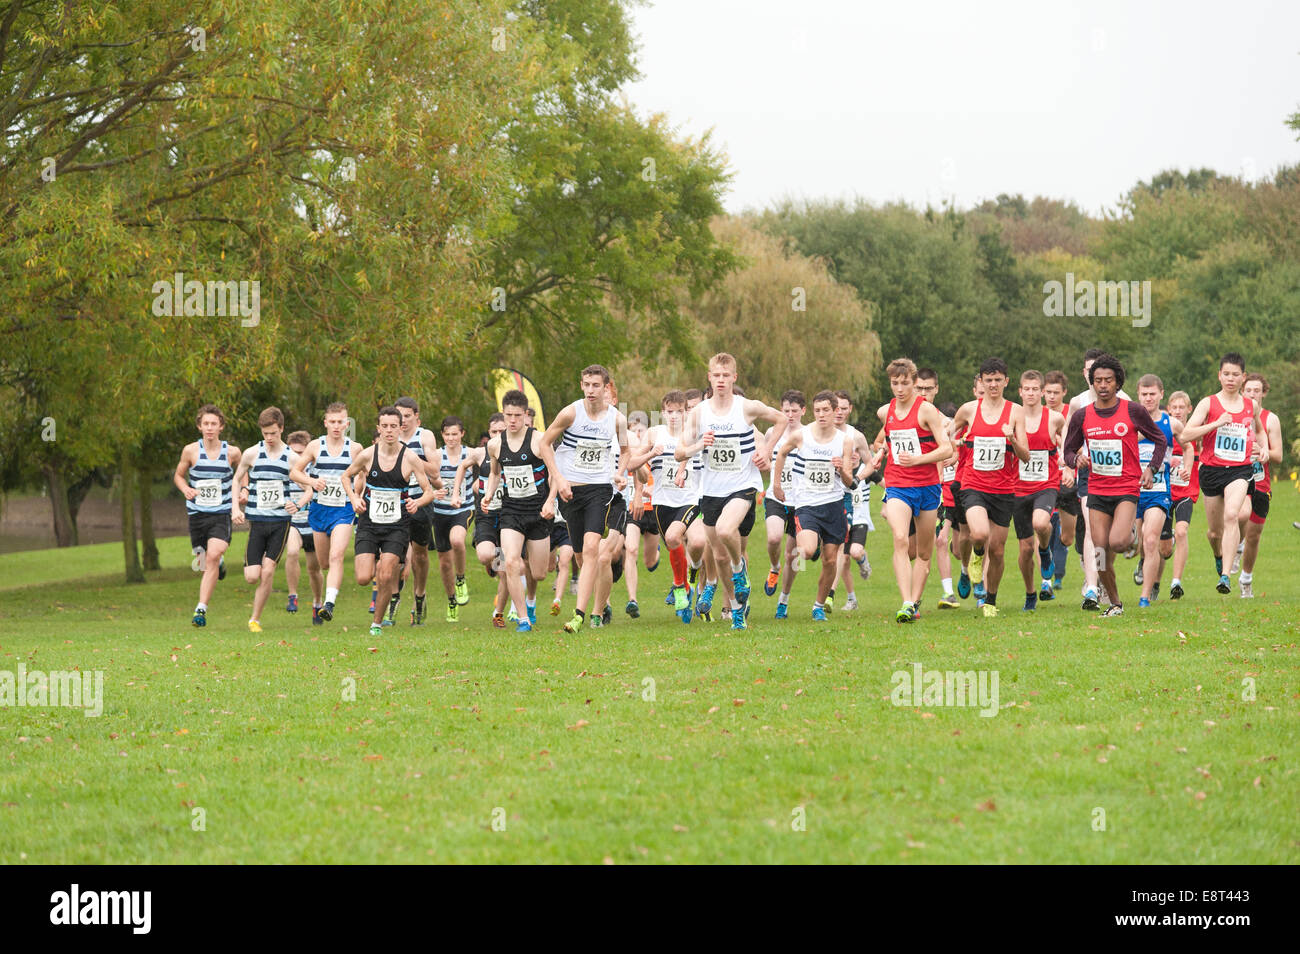 Cross country Kent Athletics team championships events start of race pack sprinting runners joggling for early lead Stock Photo